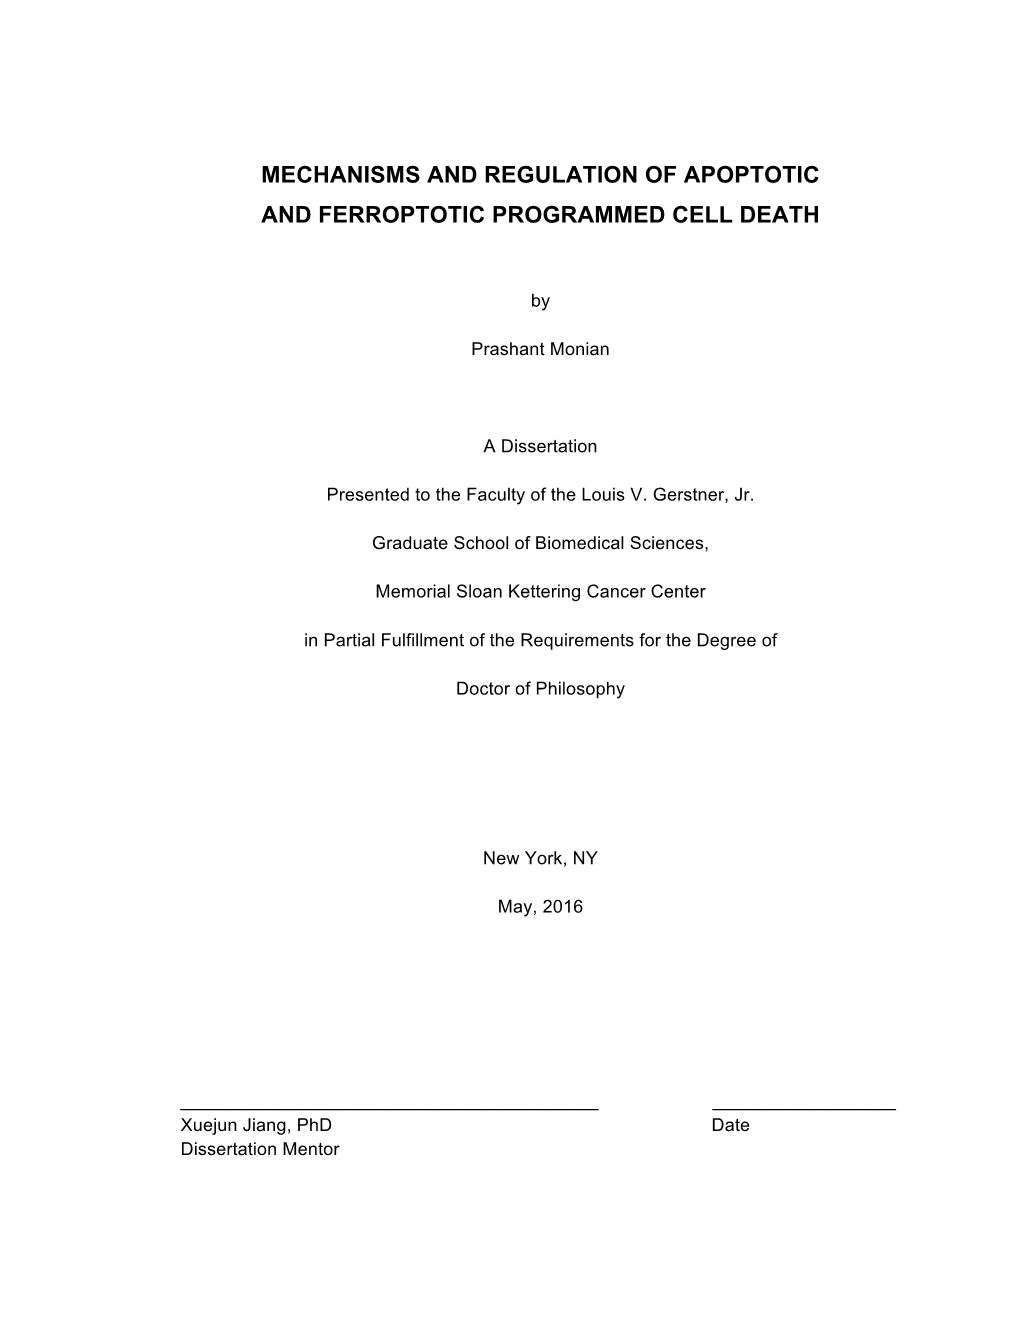 Mechanisms and Regulation of Apoptotic and Ferroptotic